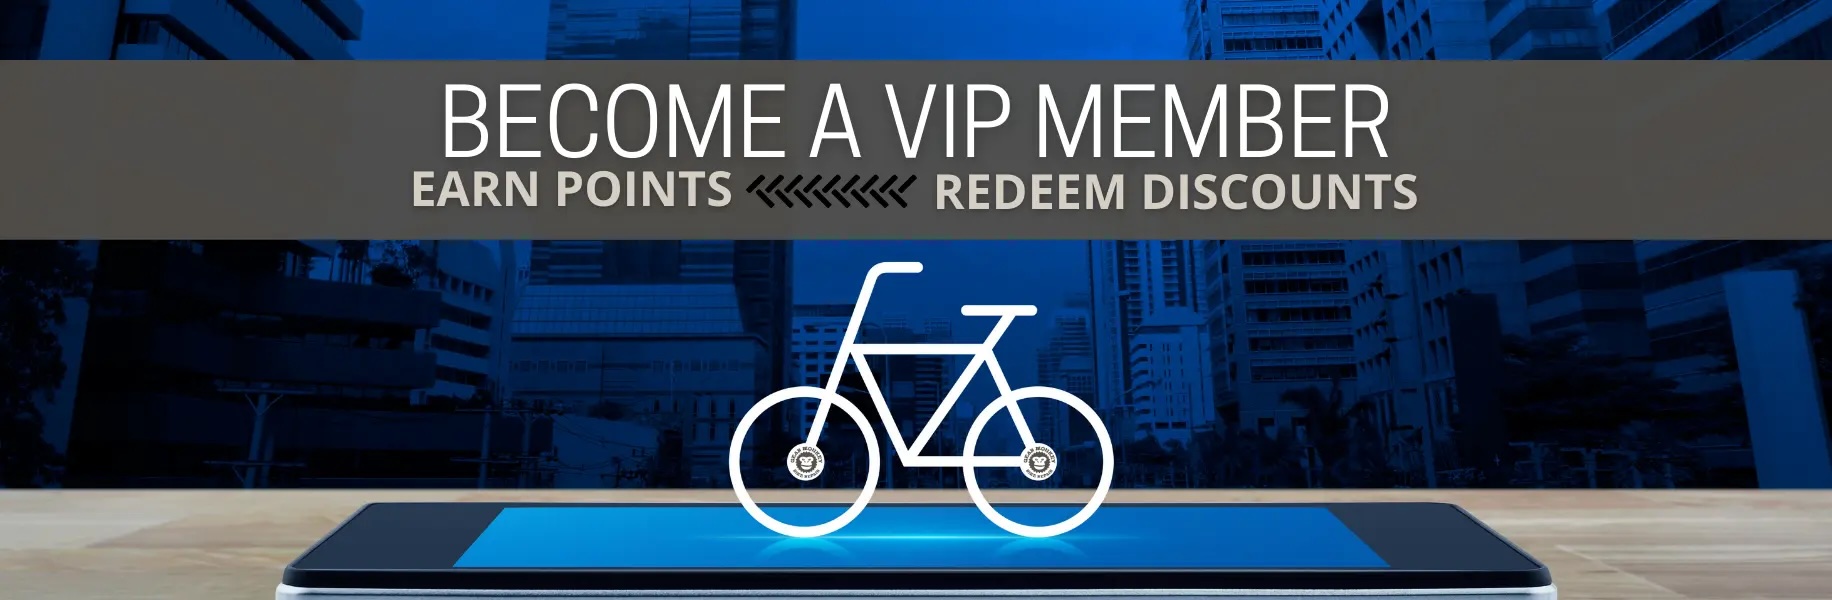 Become a VIP member. Earn points. Redeem discounts.